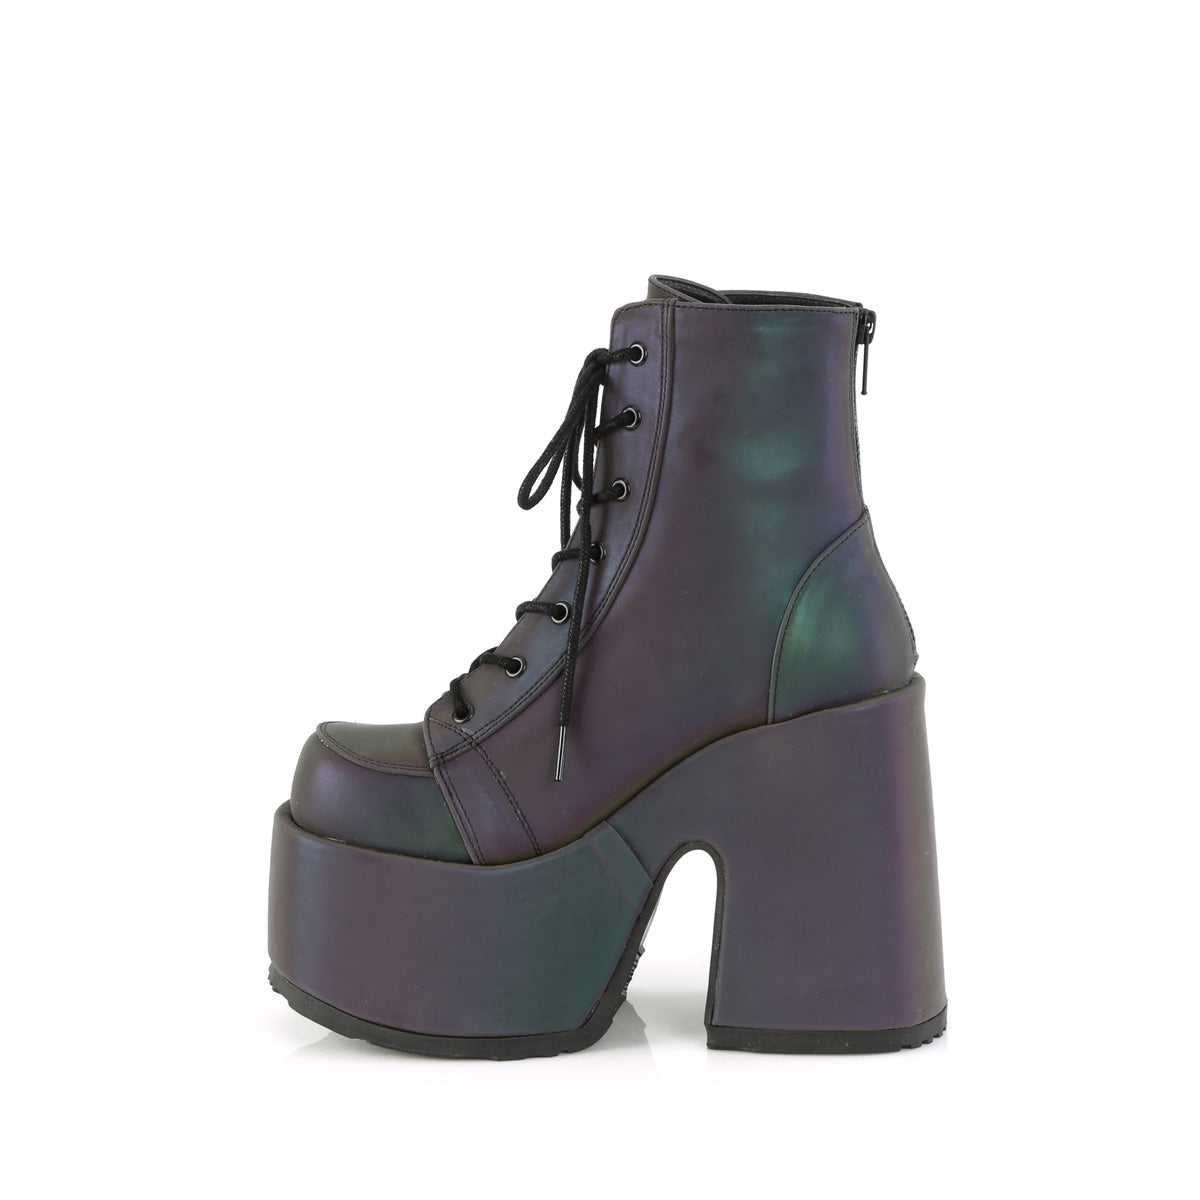 CAMEL-203 Green Multi Reflective Ankle Boot Demonia